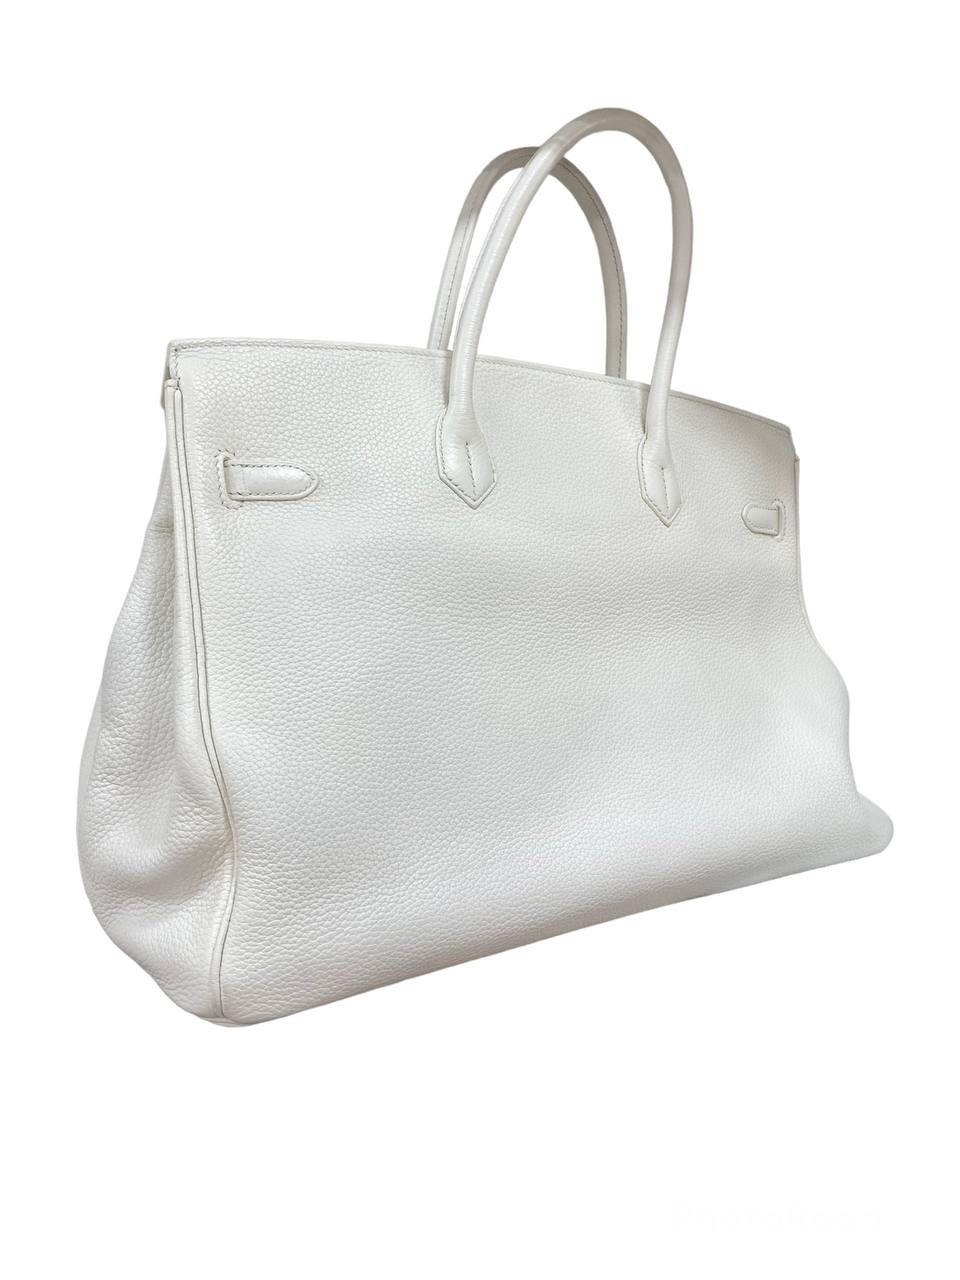 Women's 2011 Hermès Birkin 40 White Clemence Leather Top Handle Bag  For Sale